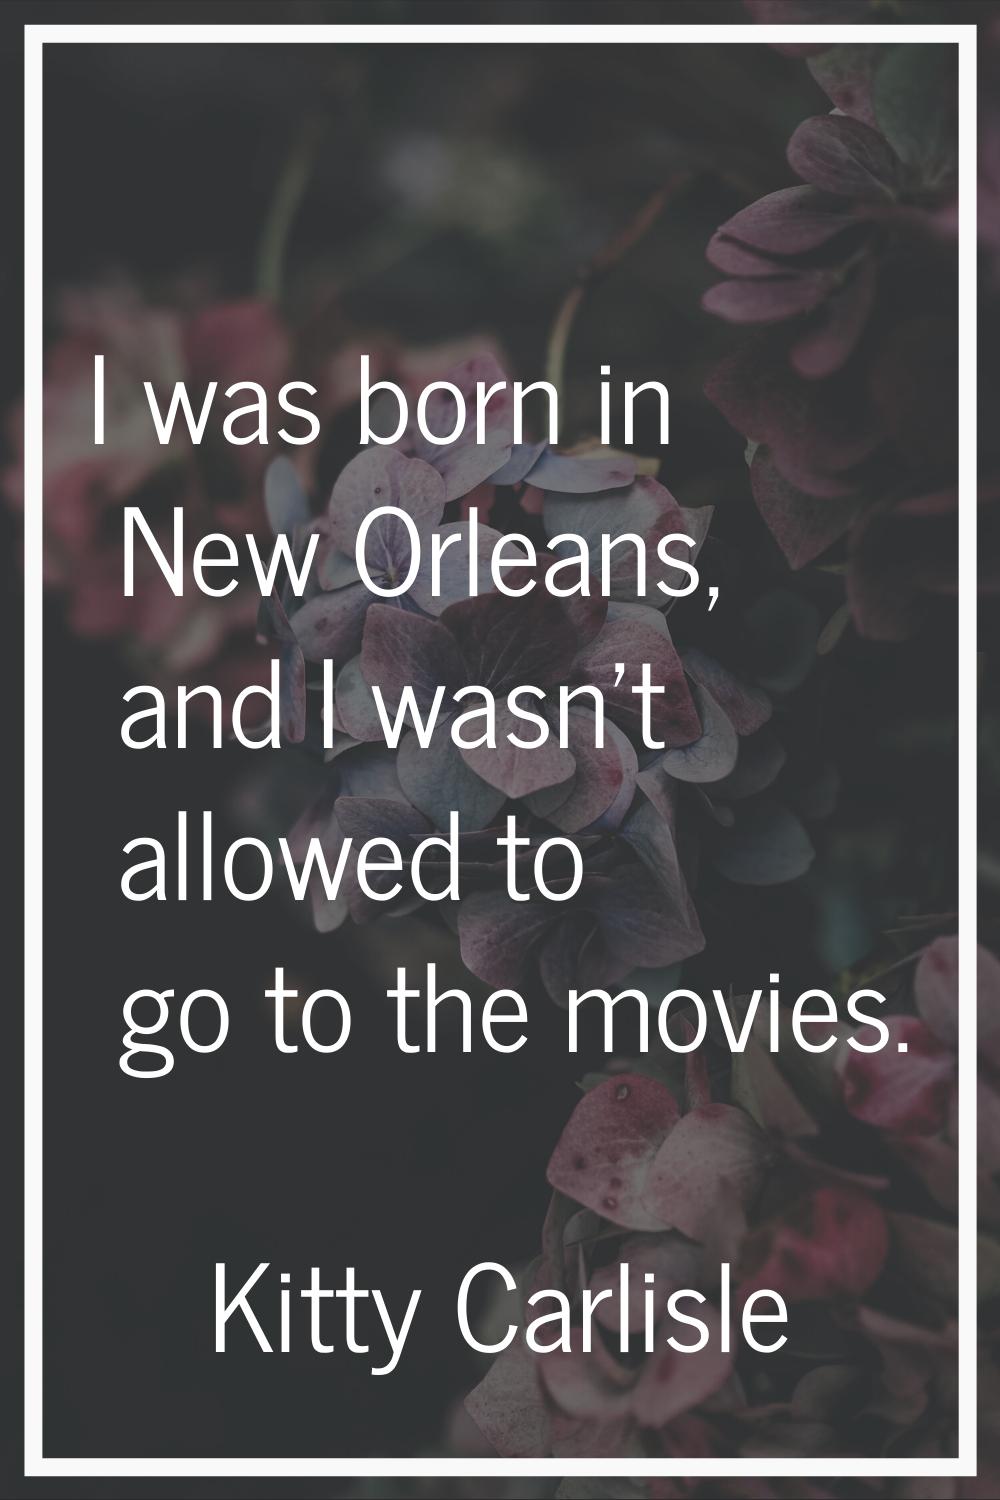 I was born in New Orleans, and I wasn't allowed to go to the movies.